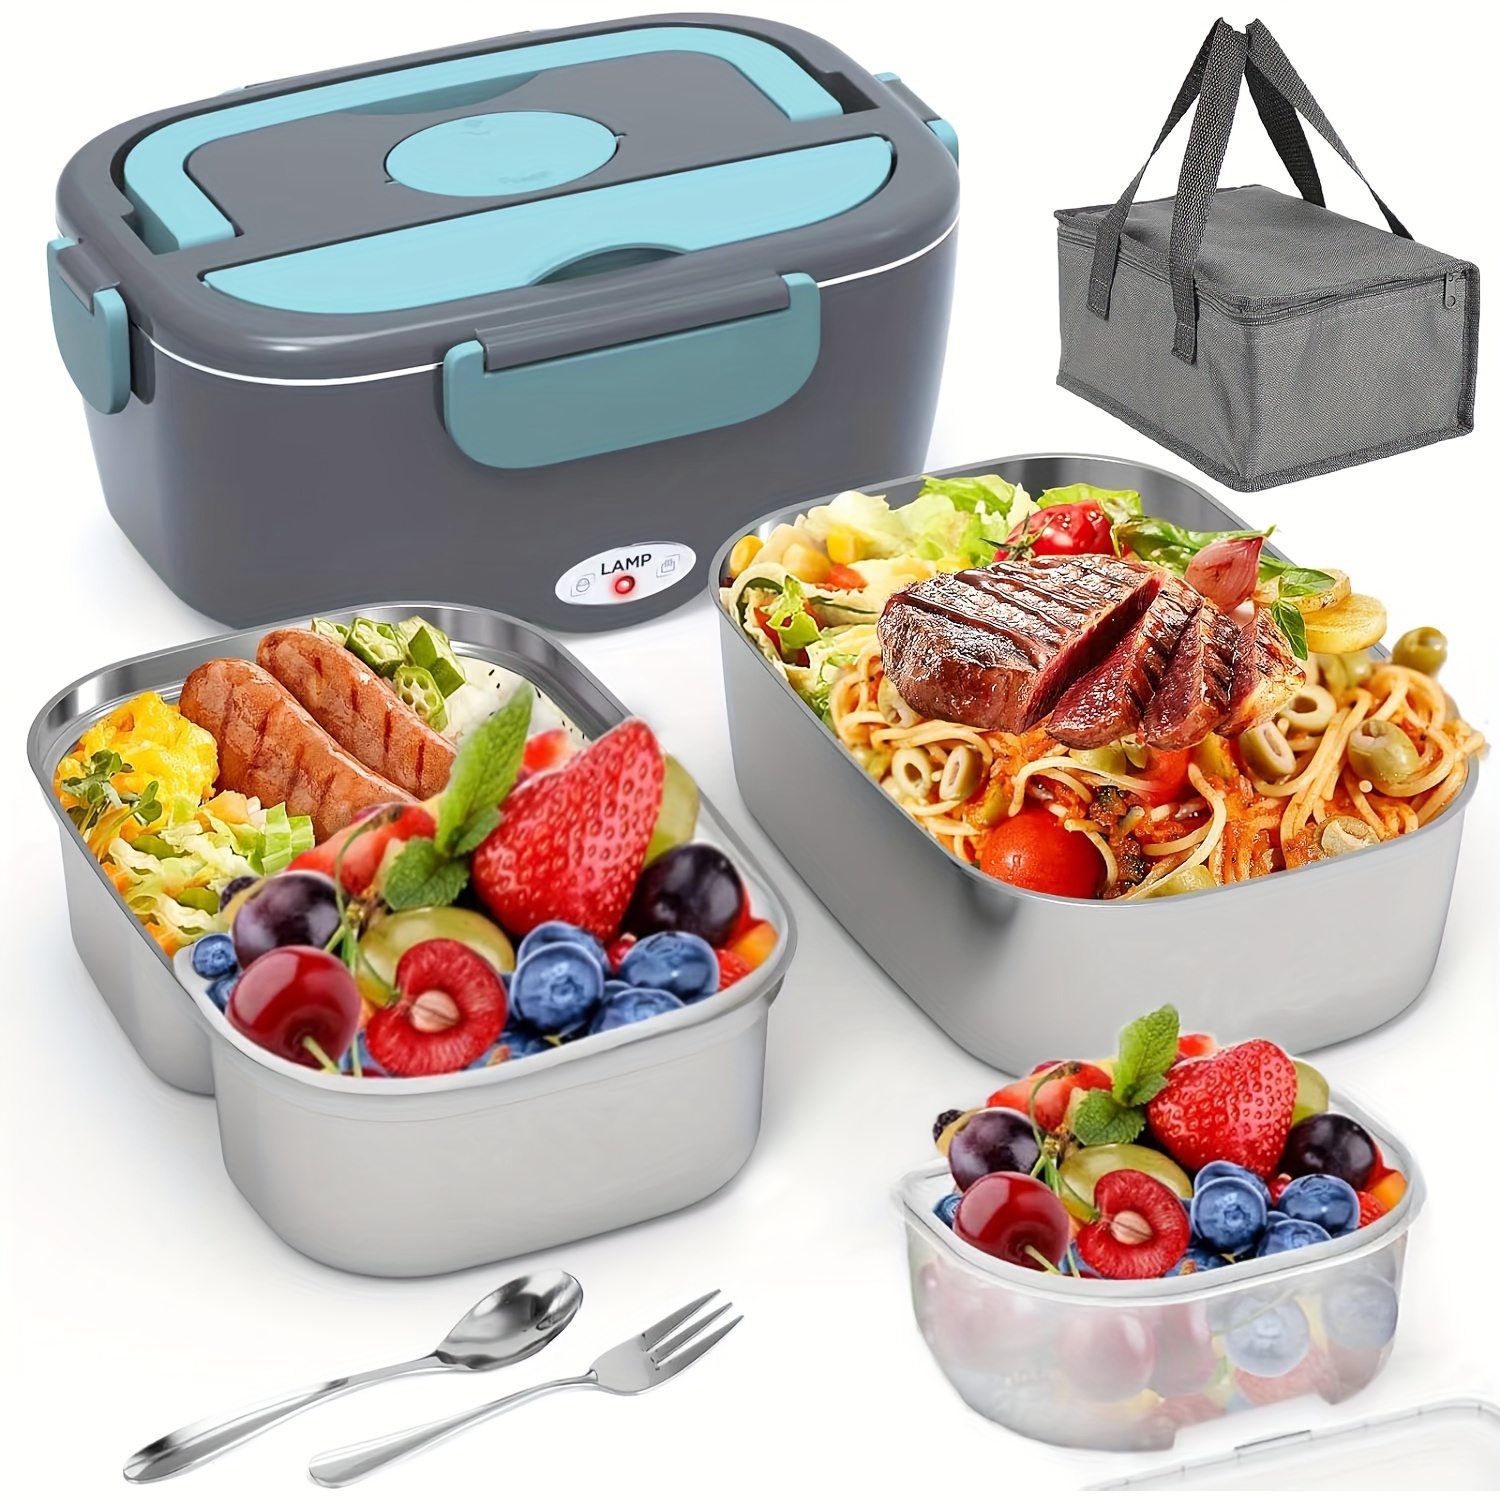 

Electric Lunch Box - Portable Fast Heating Lunch Box (12v/24v/110v) Stainless Steel Container Adult Food Warmer With 1 Food Tray - Suitable For Cars, Trucks, Offices And Outdoors (green)